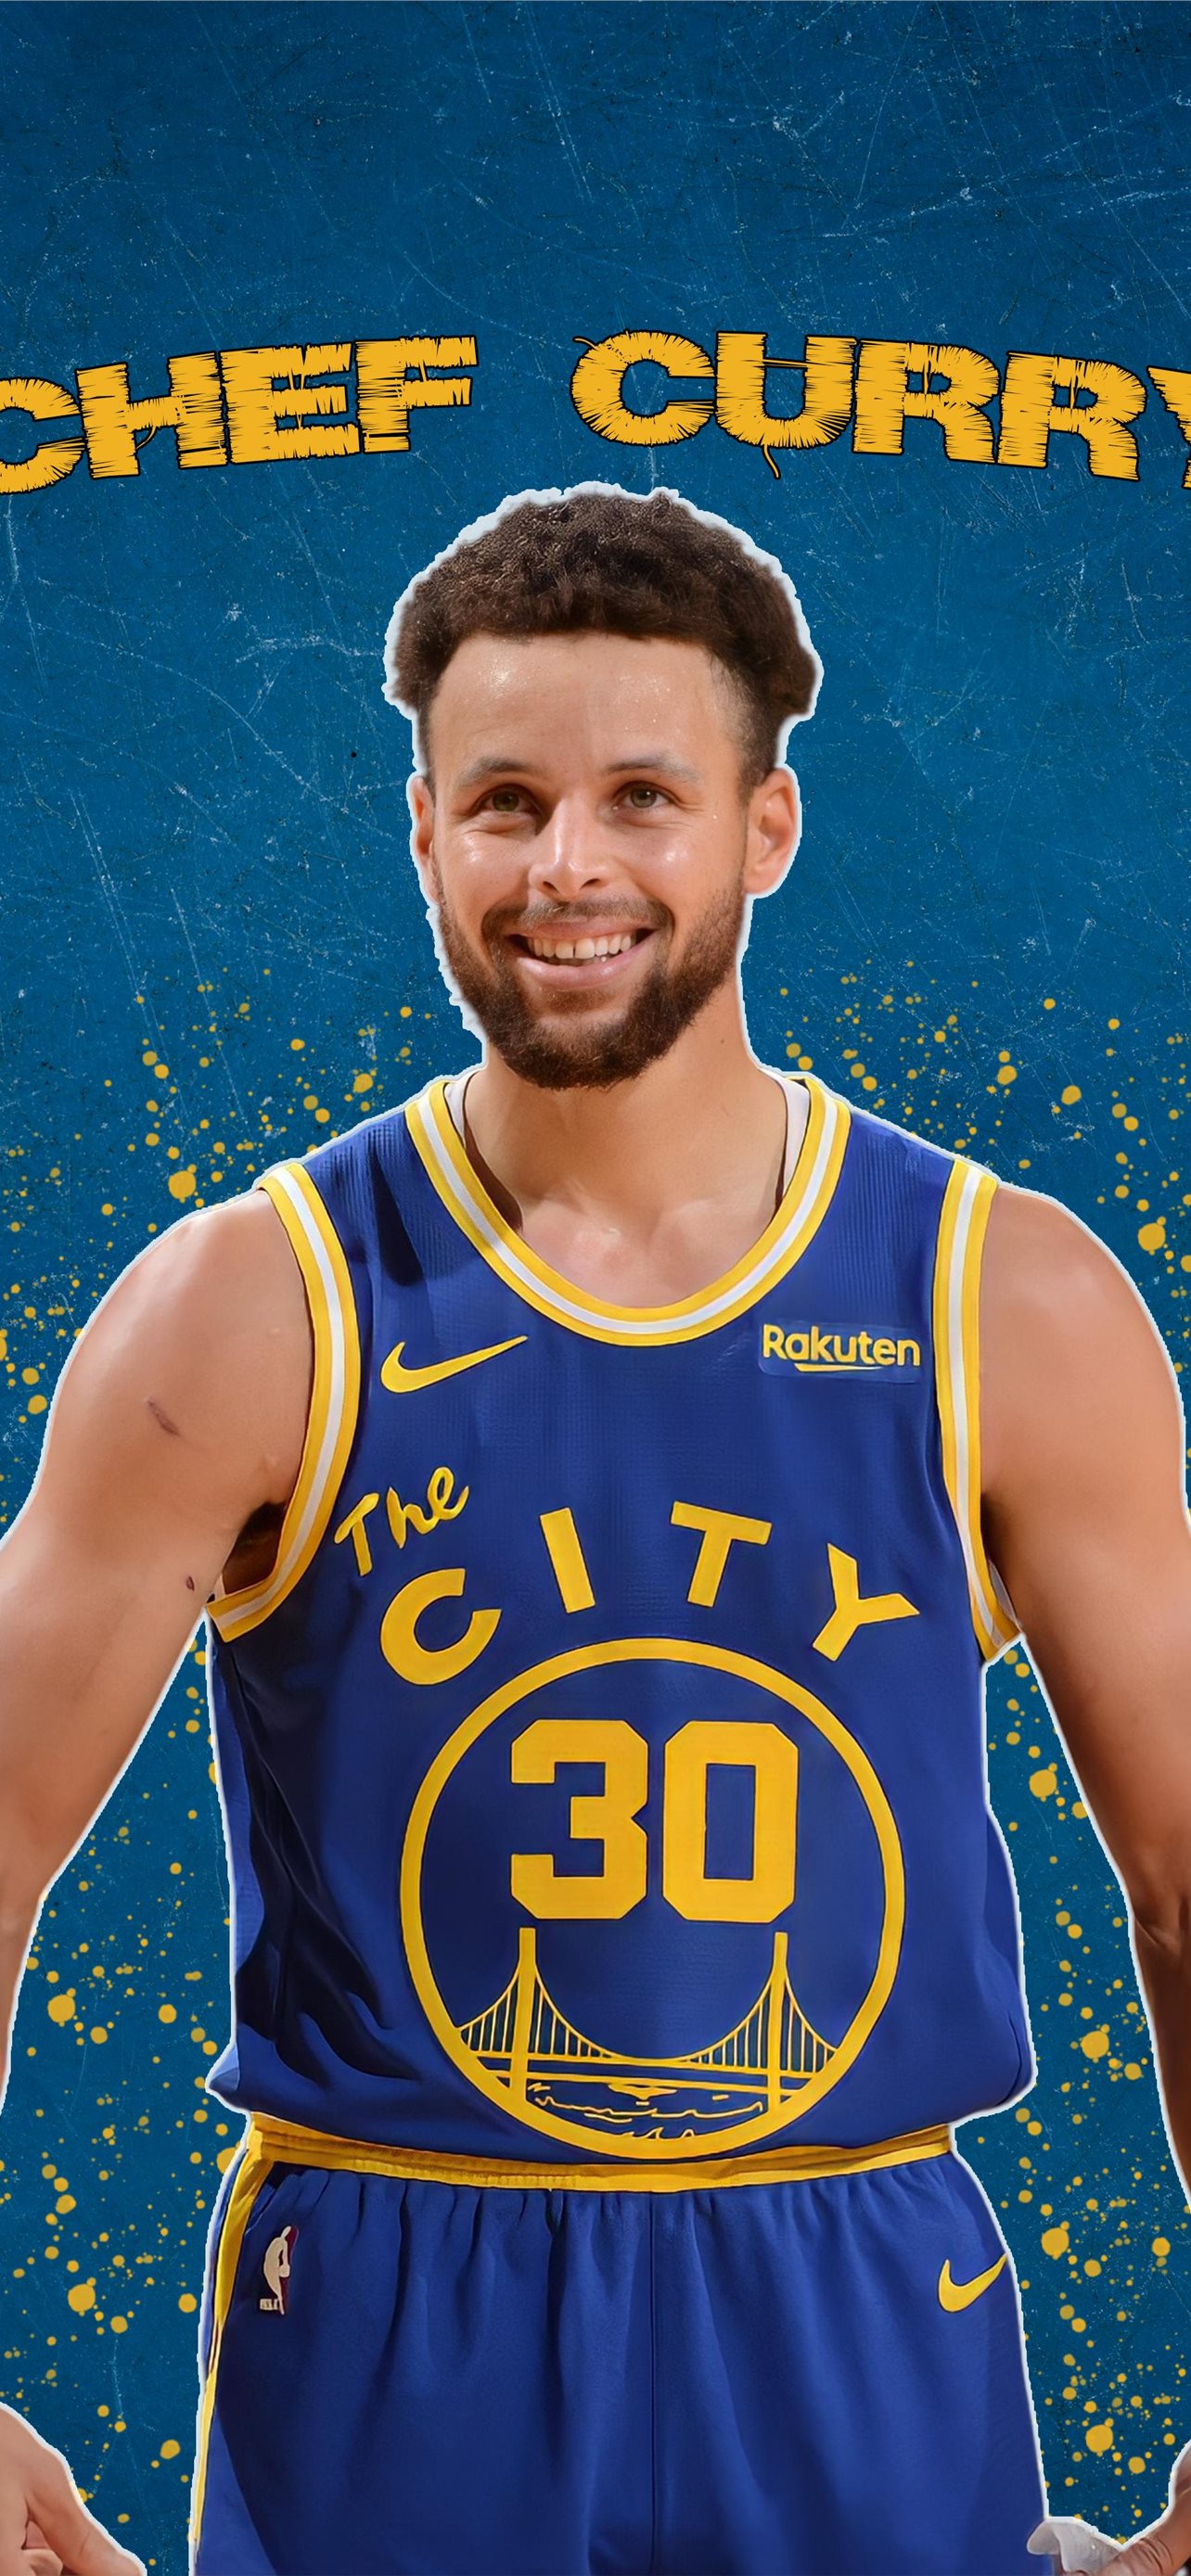 Stephen Curry 2020 Wallpapers